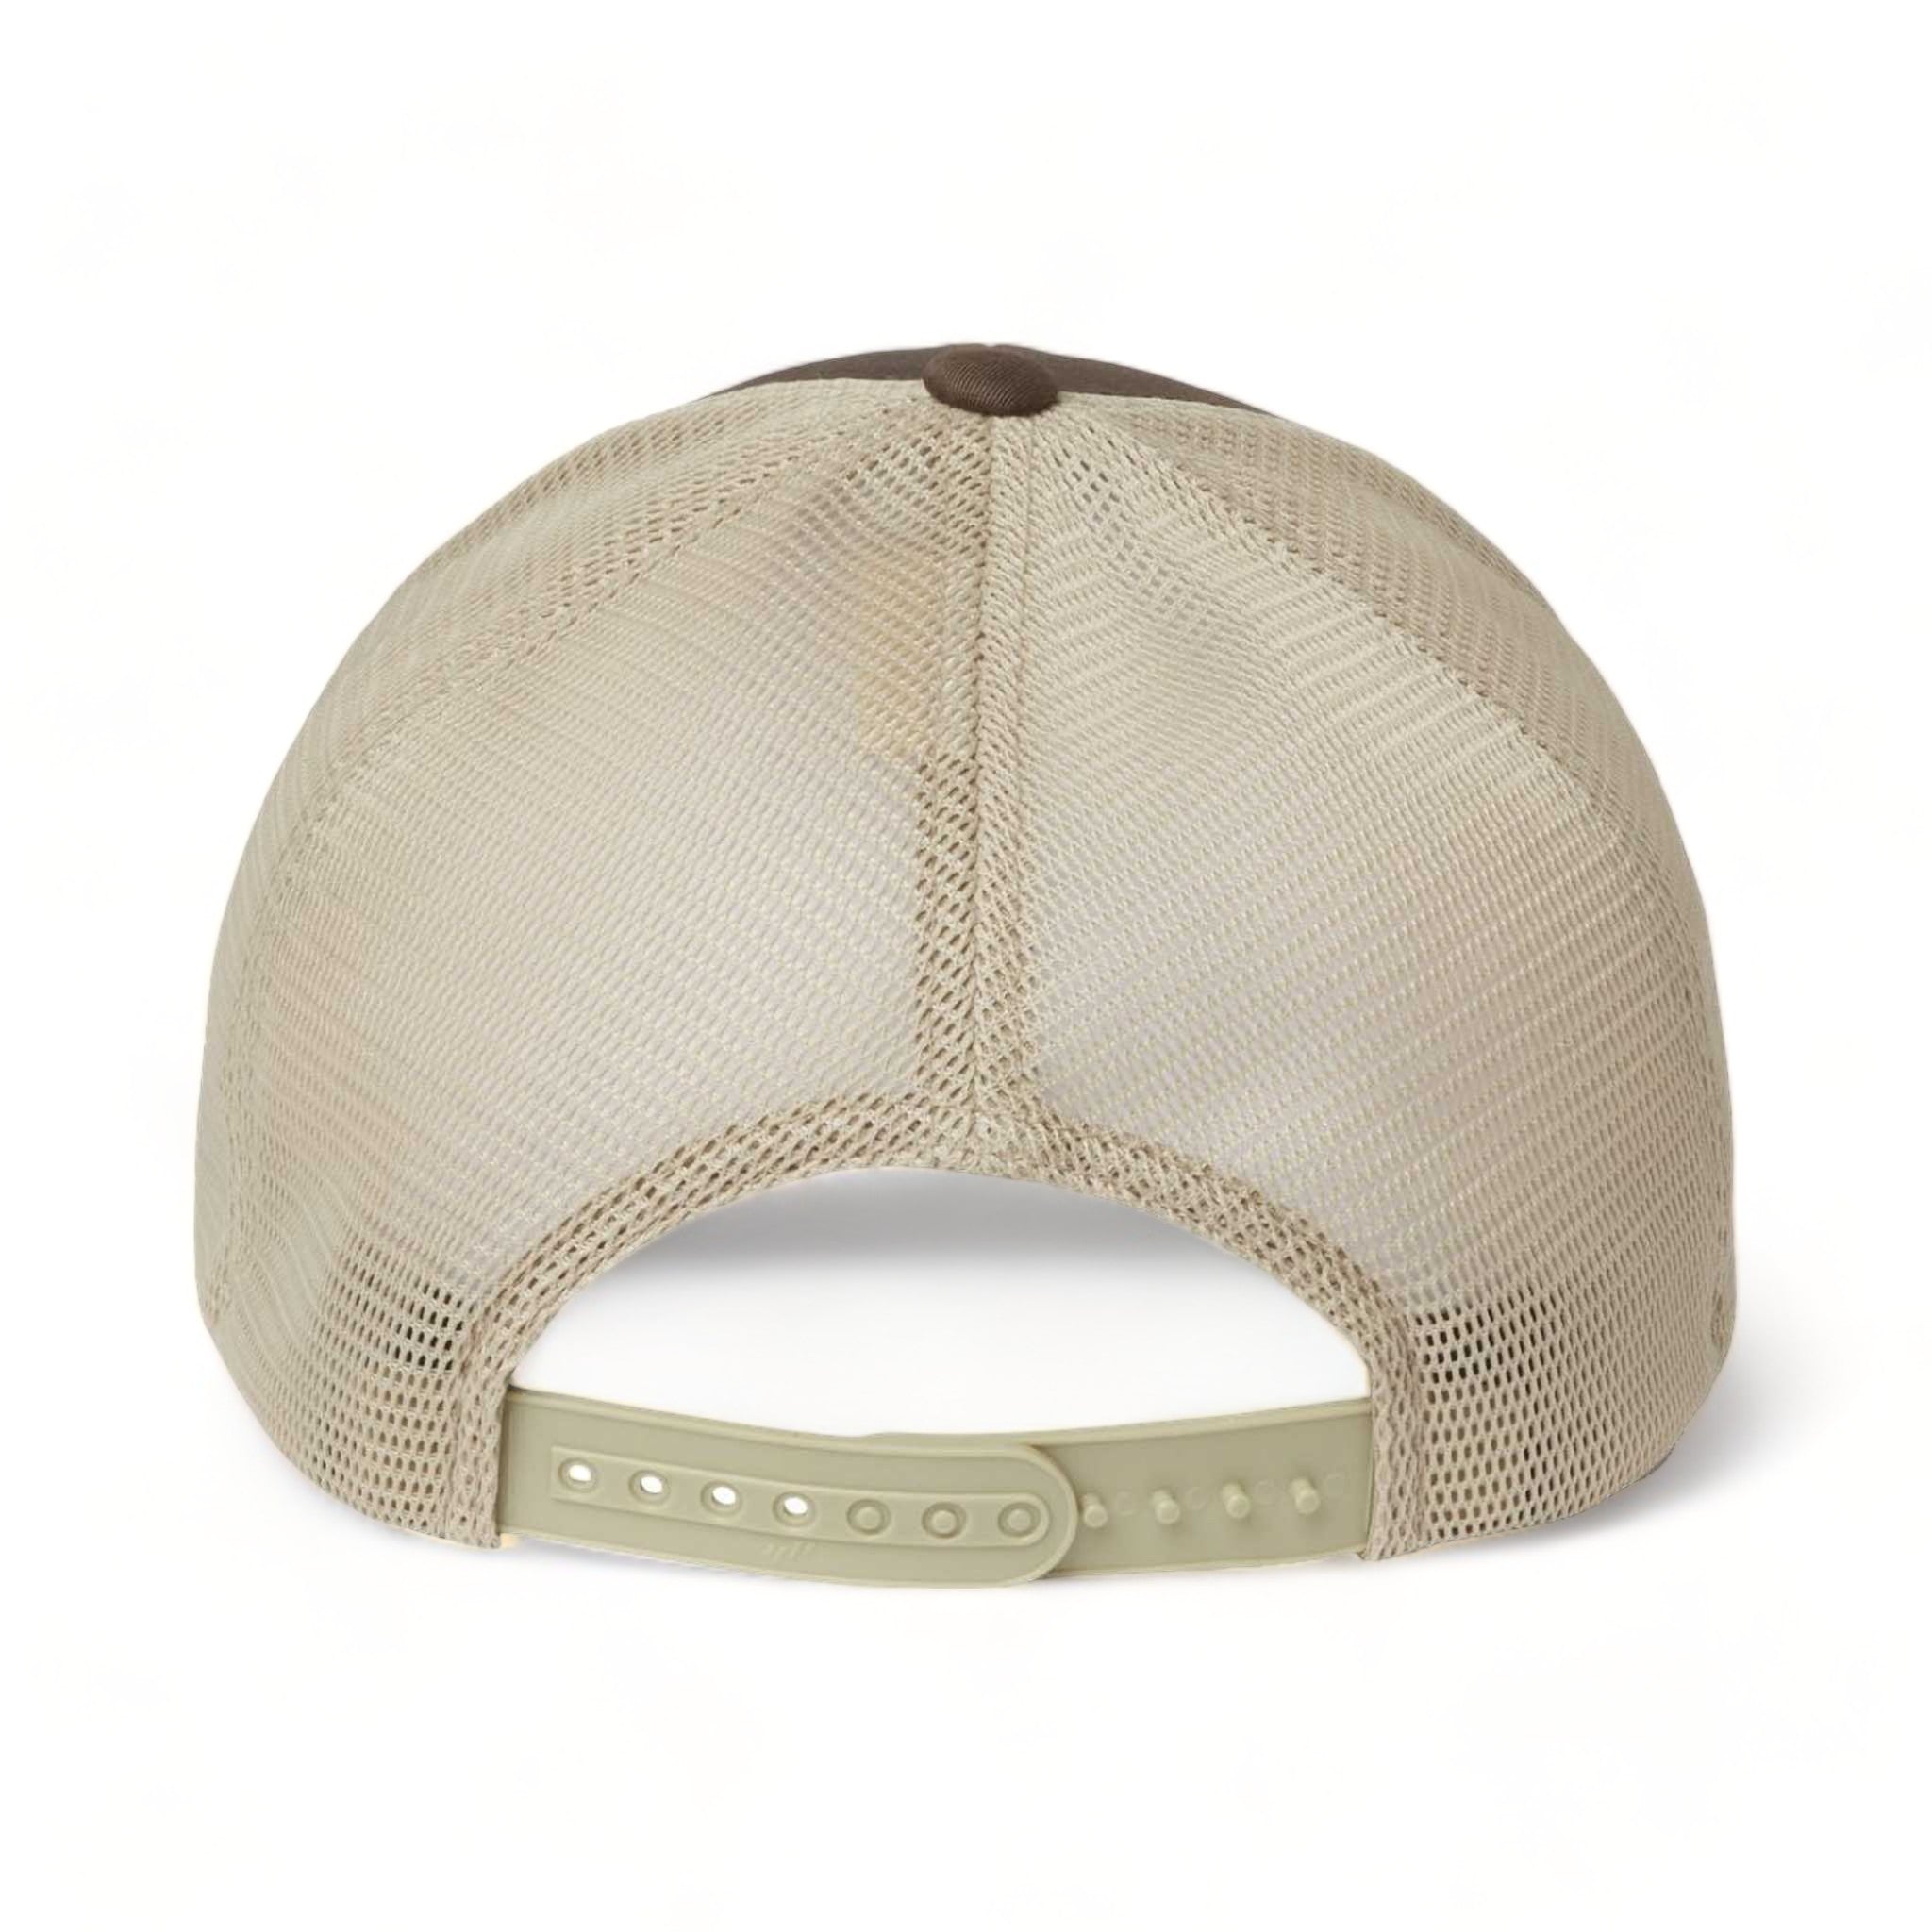 Back view of Flexfit 110M custom hat in brown and khaki